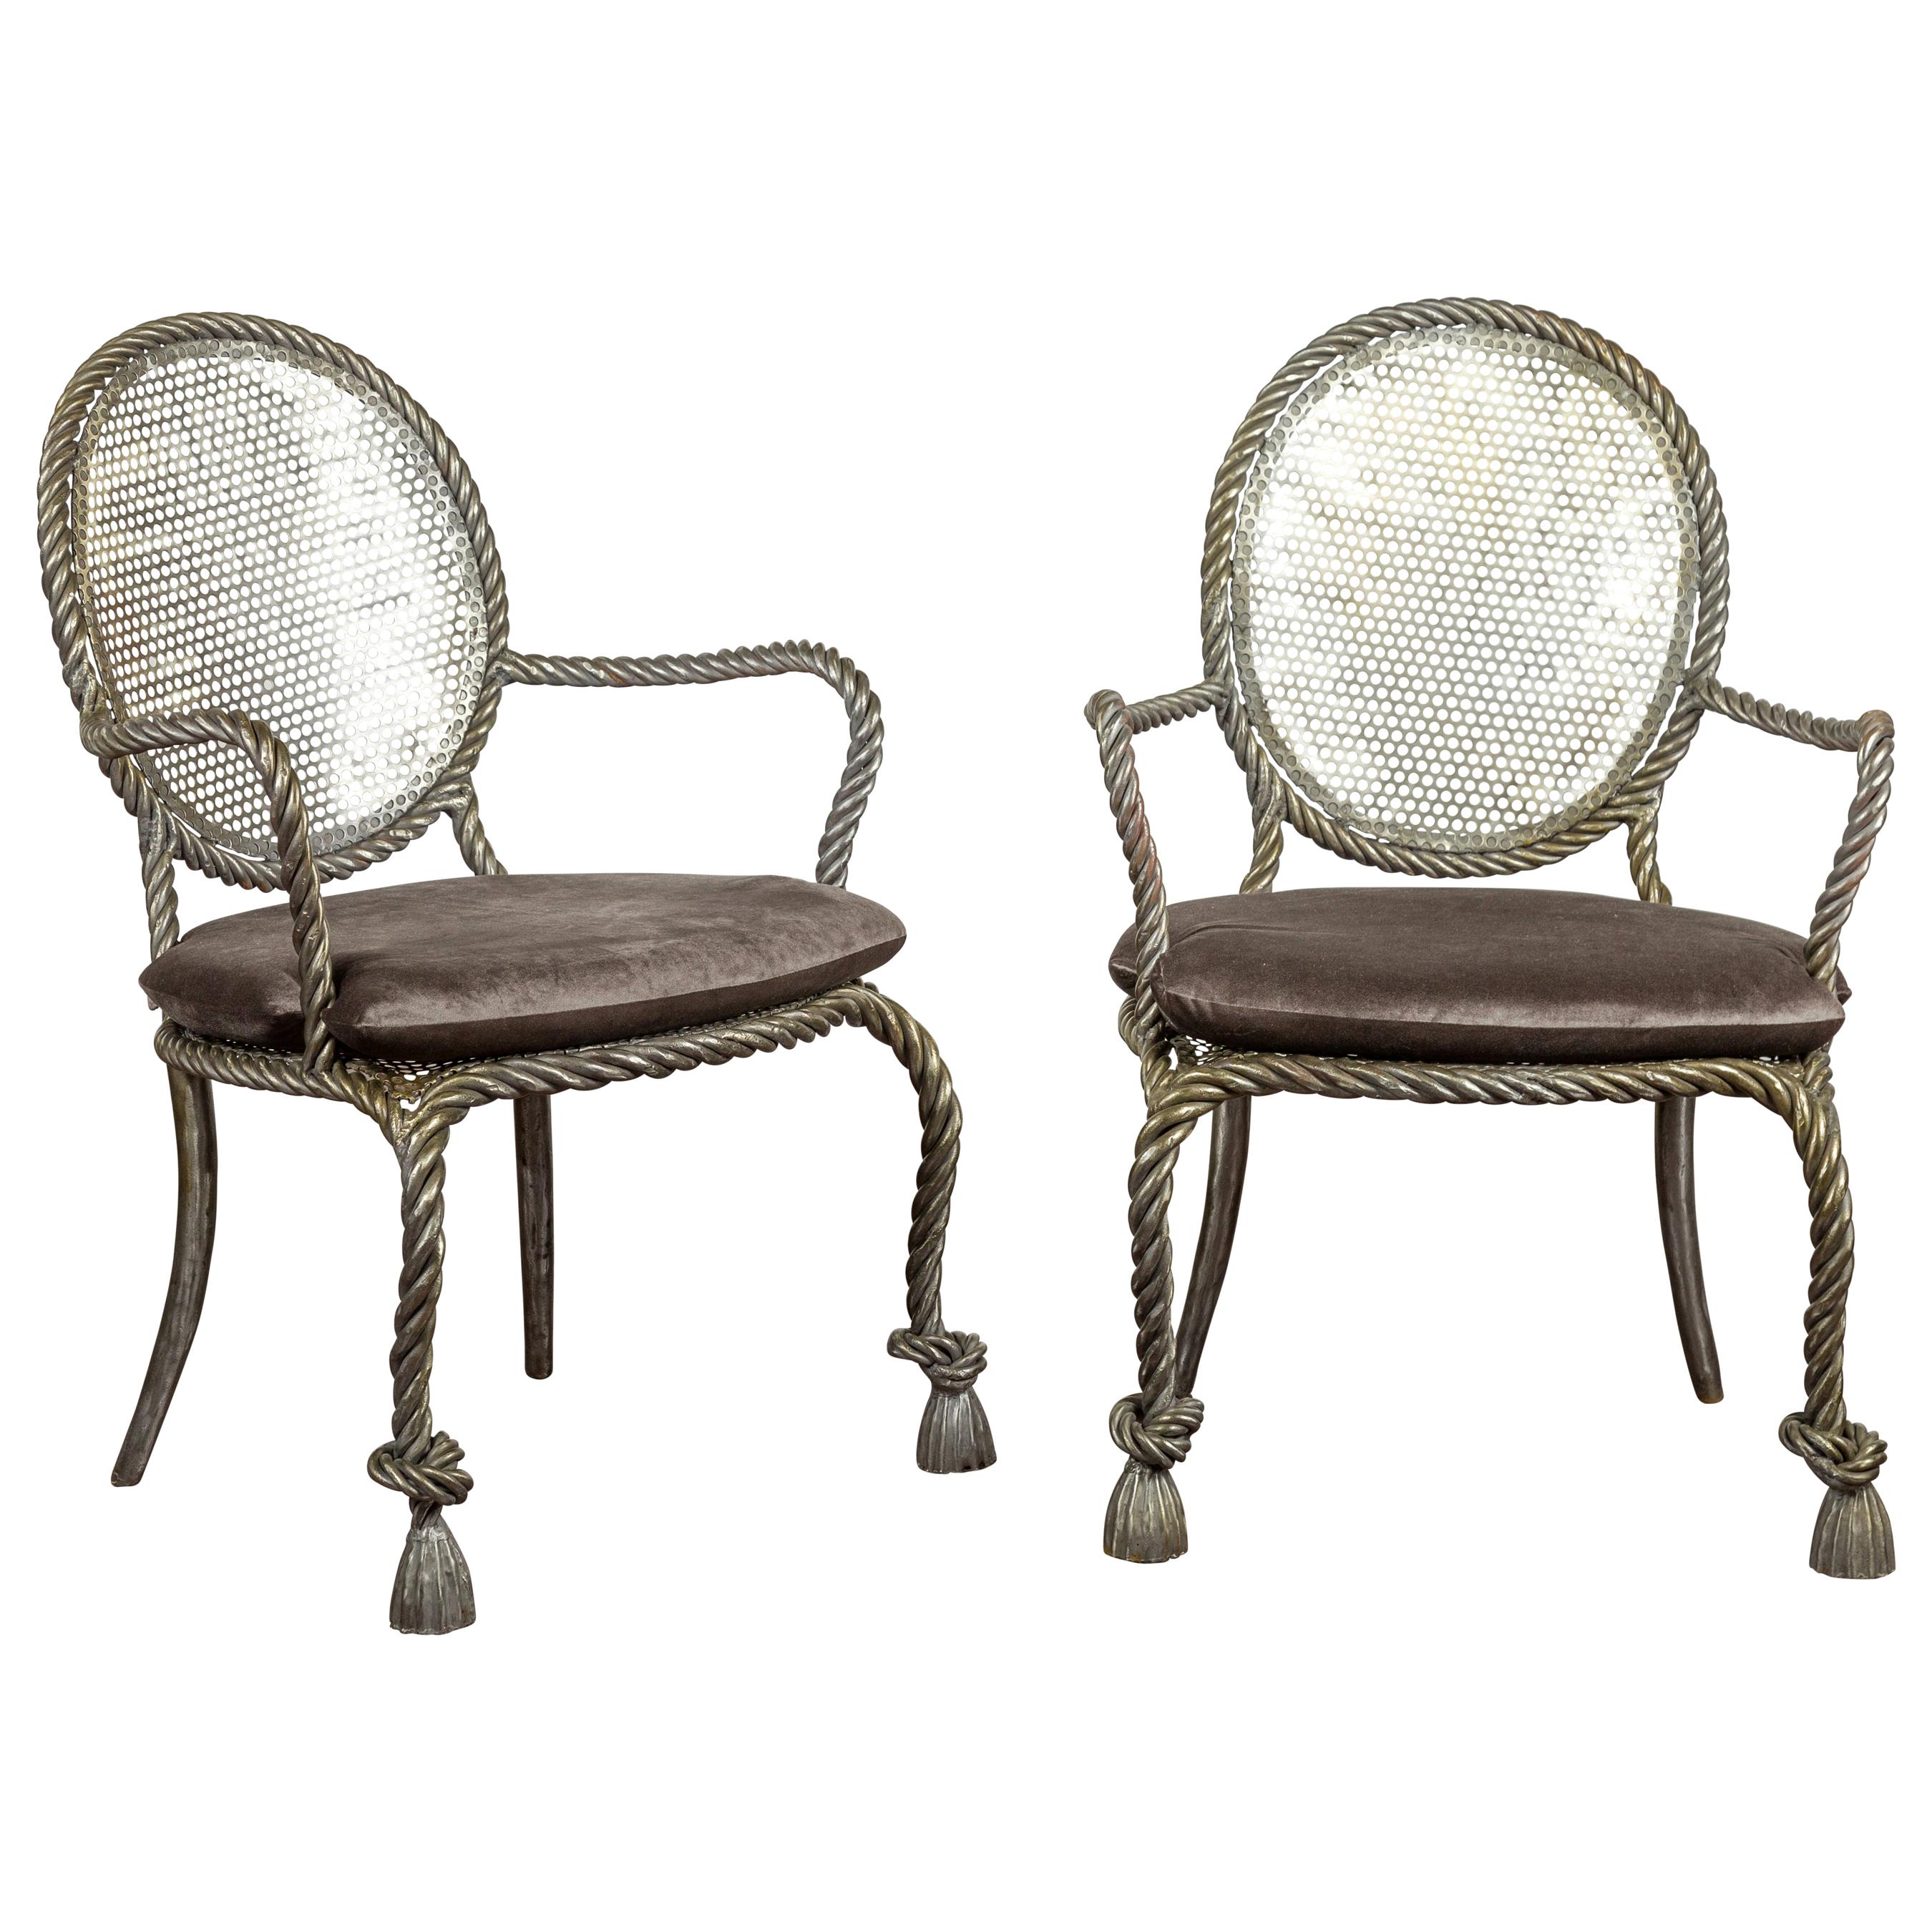 Pair of Italian Midcentury Polished Steel Rope Armchairs with Velvet Cushion For Sale